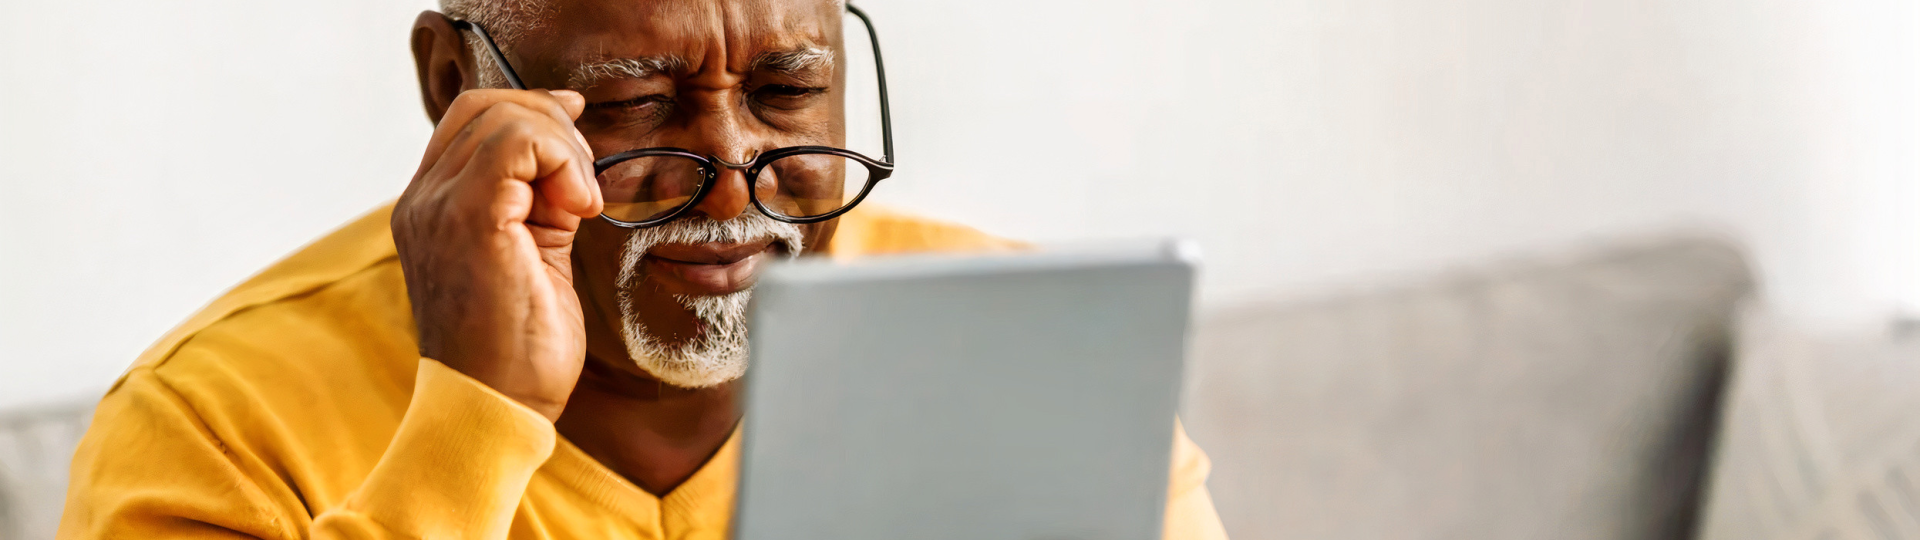 "Senior man wearing glasses and having difficulty viewing tablet, symbolizing the importance of maintaining good eye health as we age"